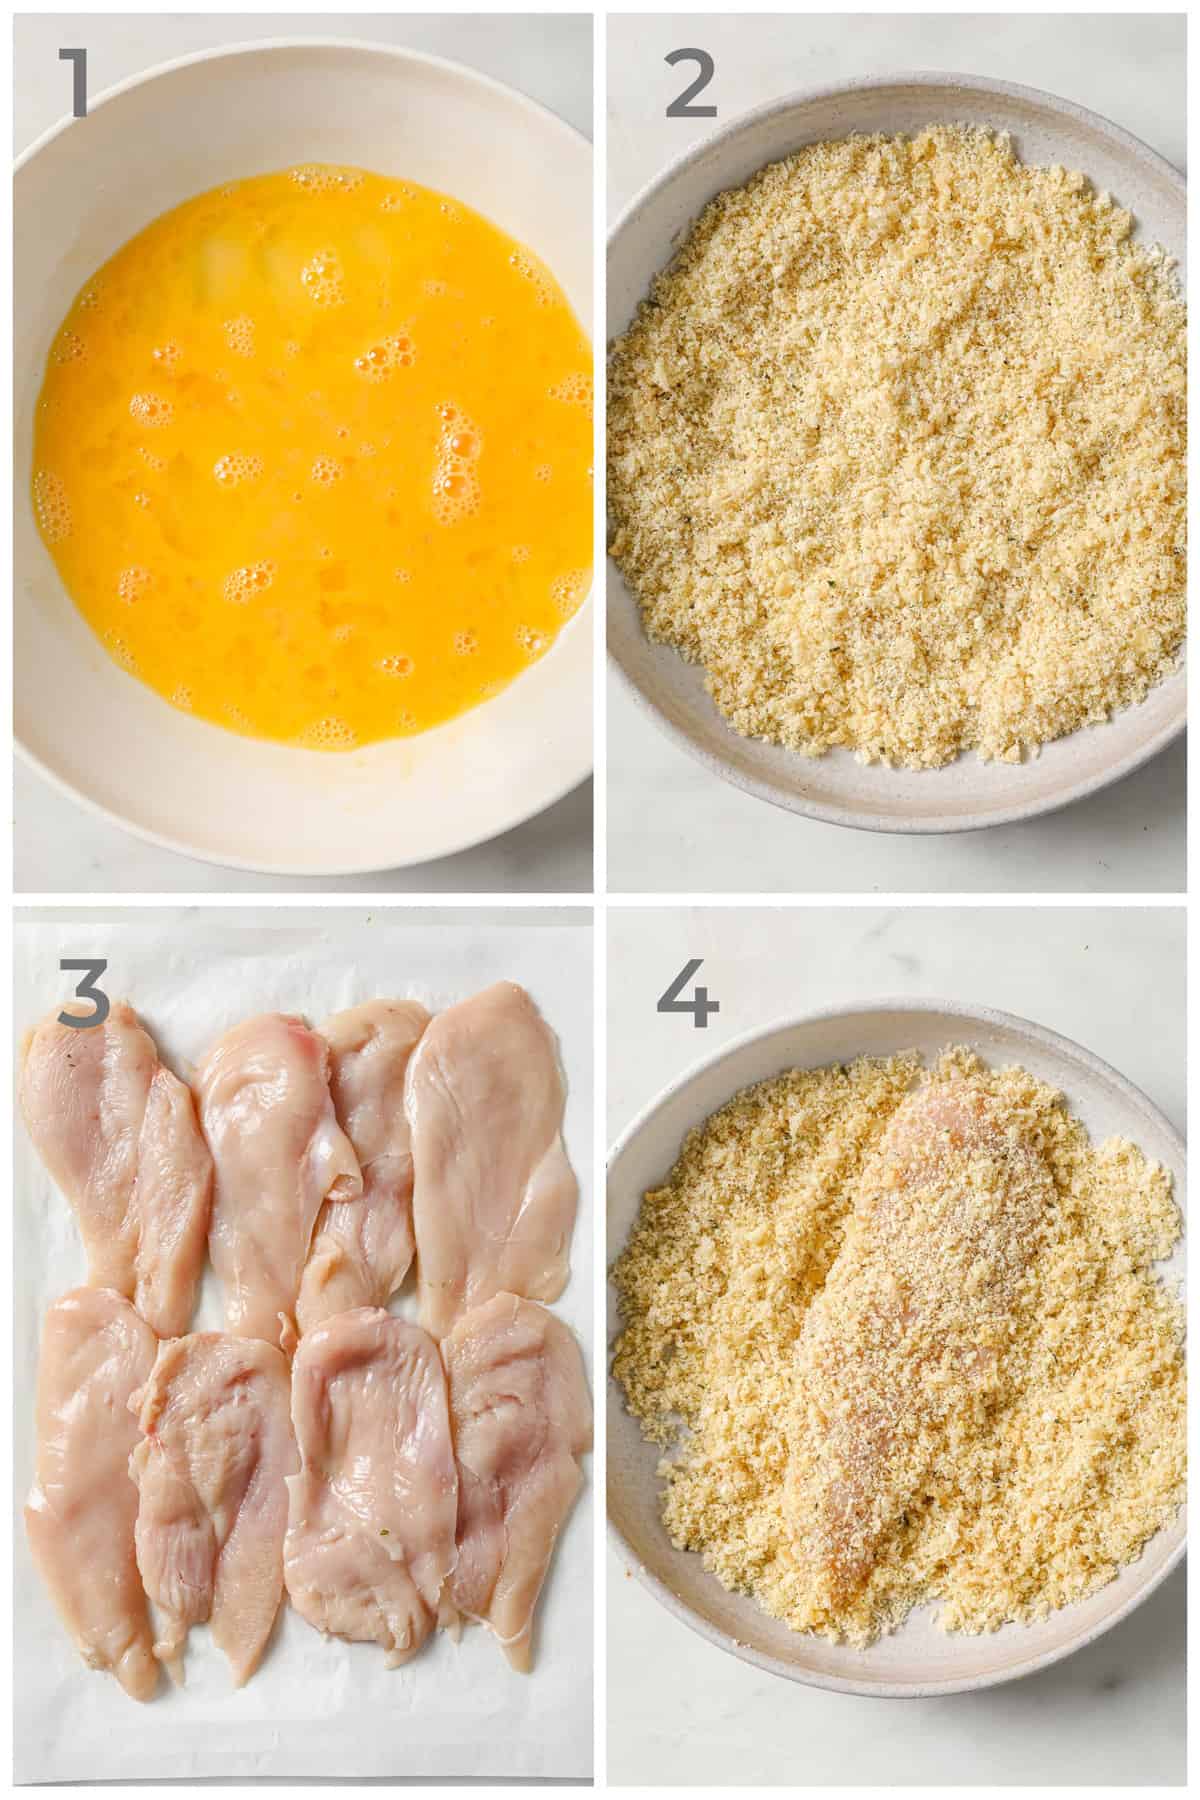 4 step by step photos showing egg wash, breading, raw chicken breasts and breaded chicken breasts.